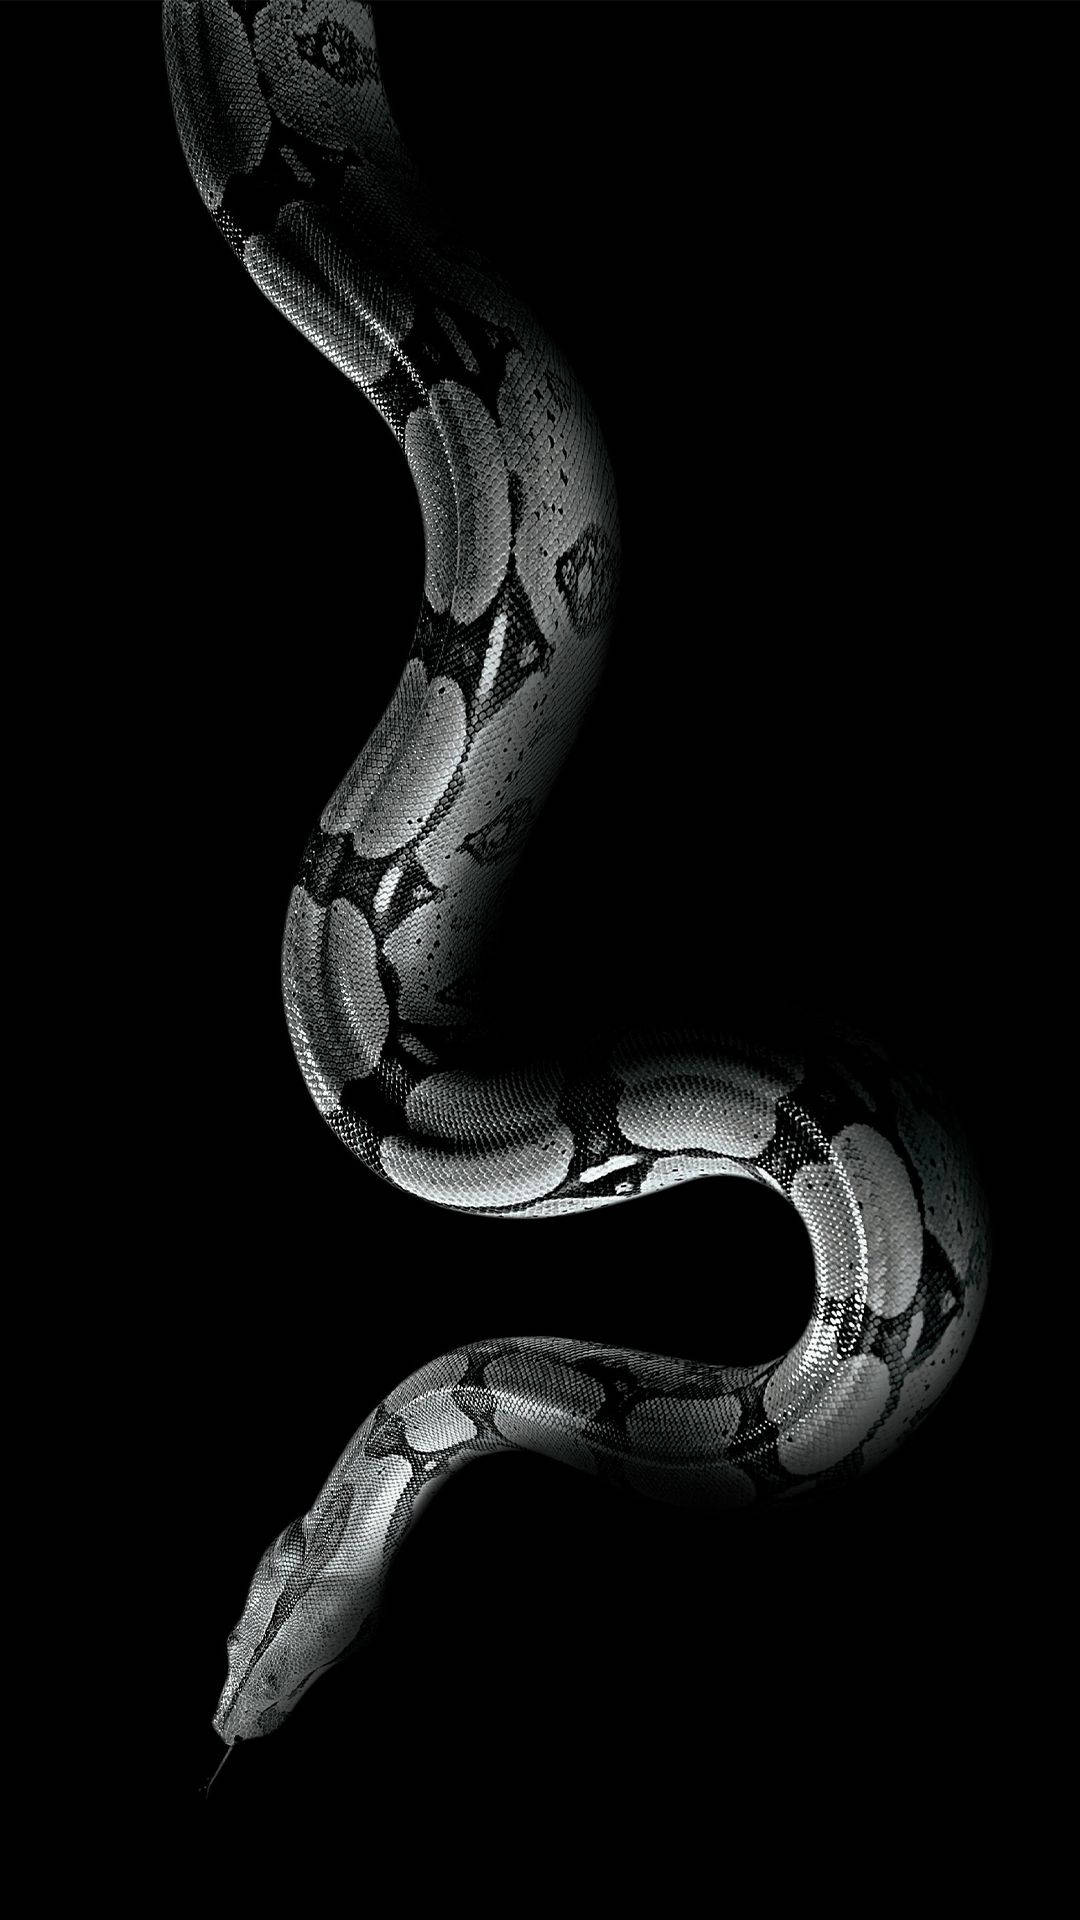 Boa Constrictor Africa Iphone Wallpaper